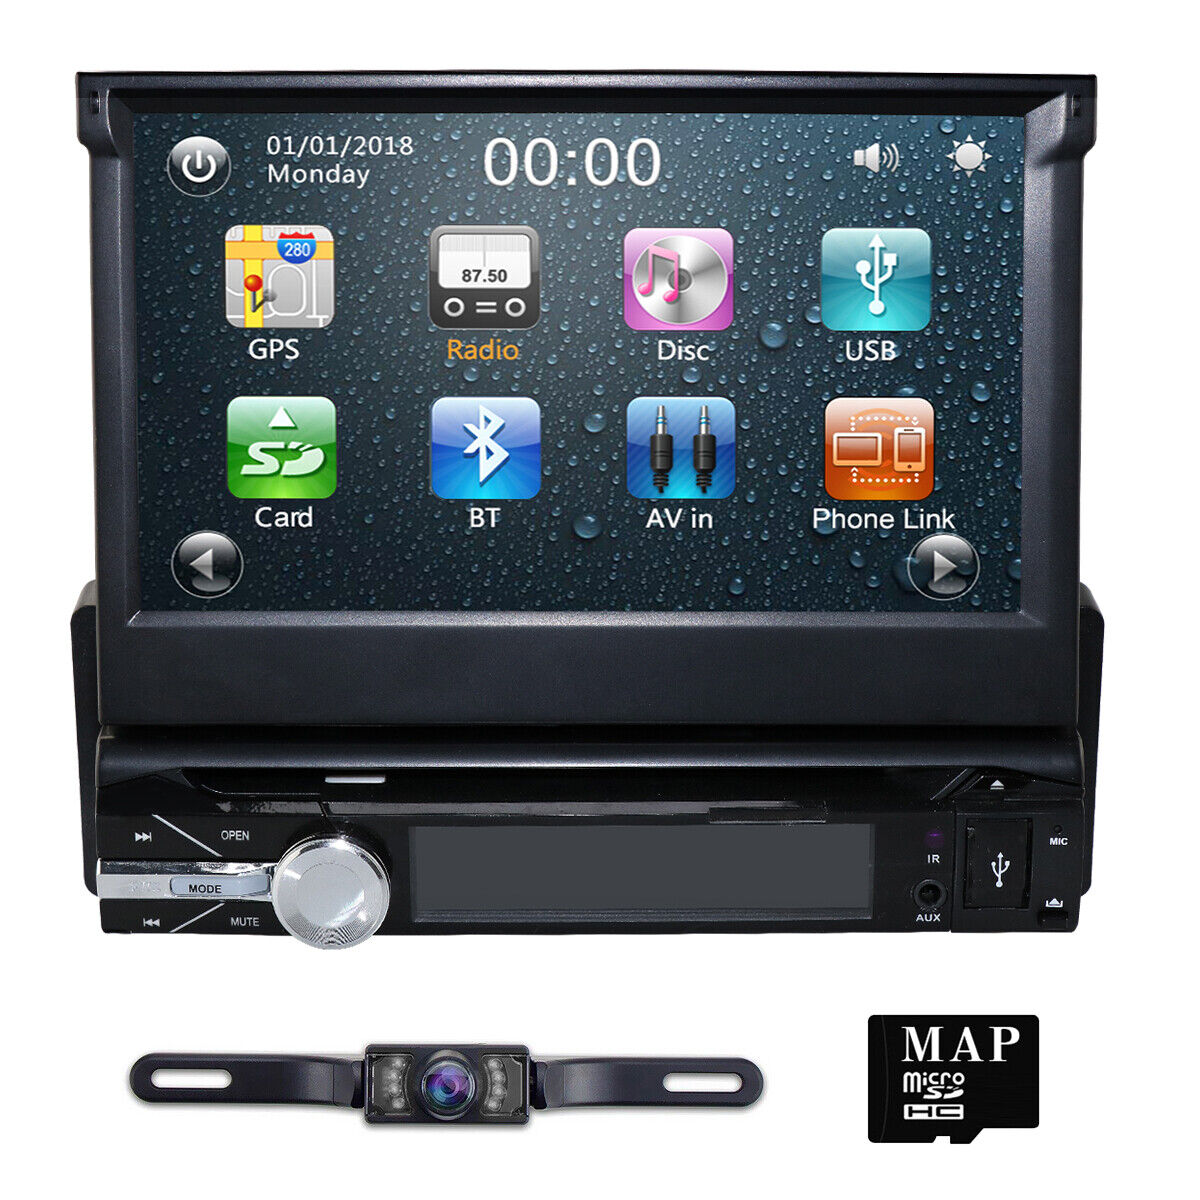 recept sessie Zonnebrand GPS Navi Android4g WiFi 6.95"double 2din Car Radio Stereo No DVD Player  Camera for sale online | eBay